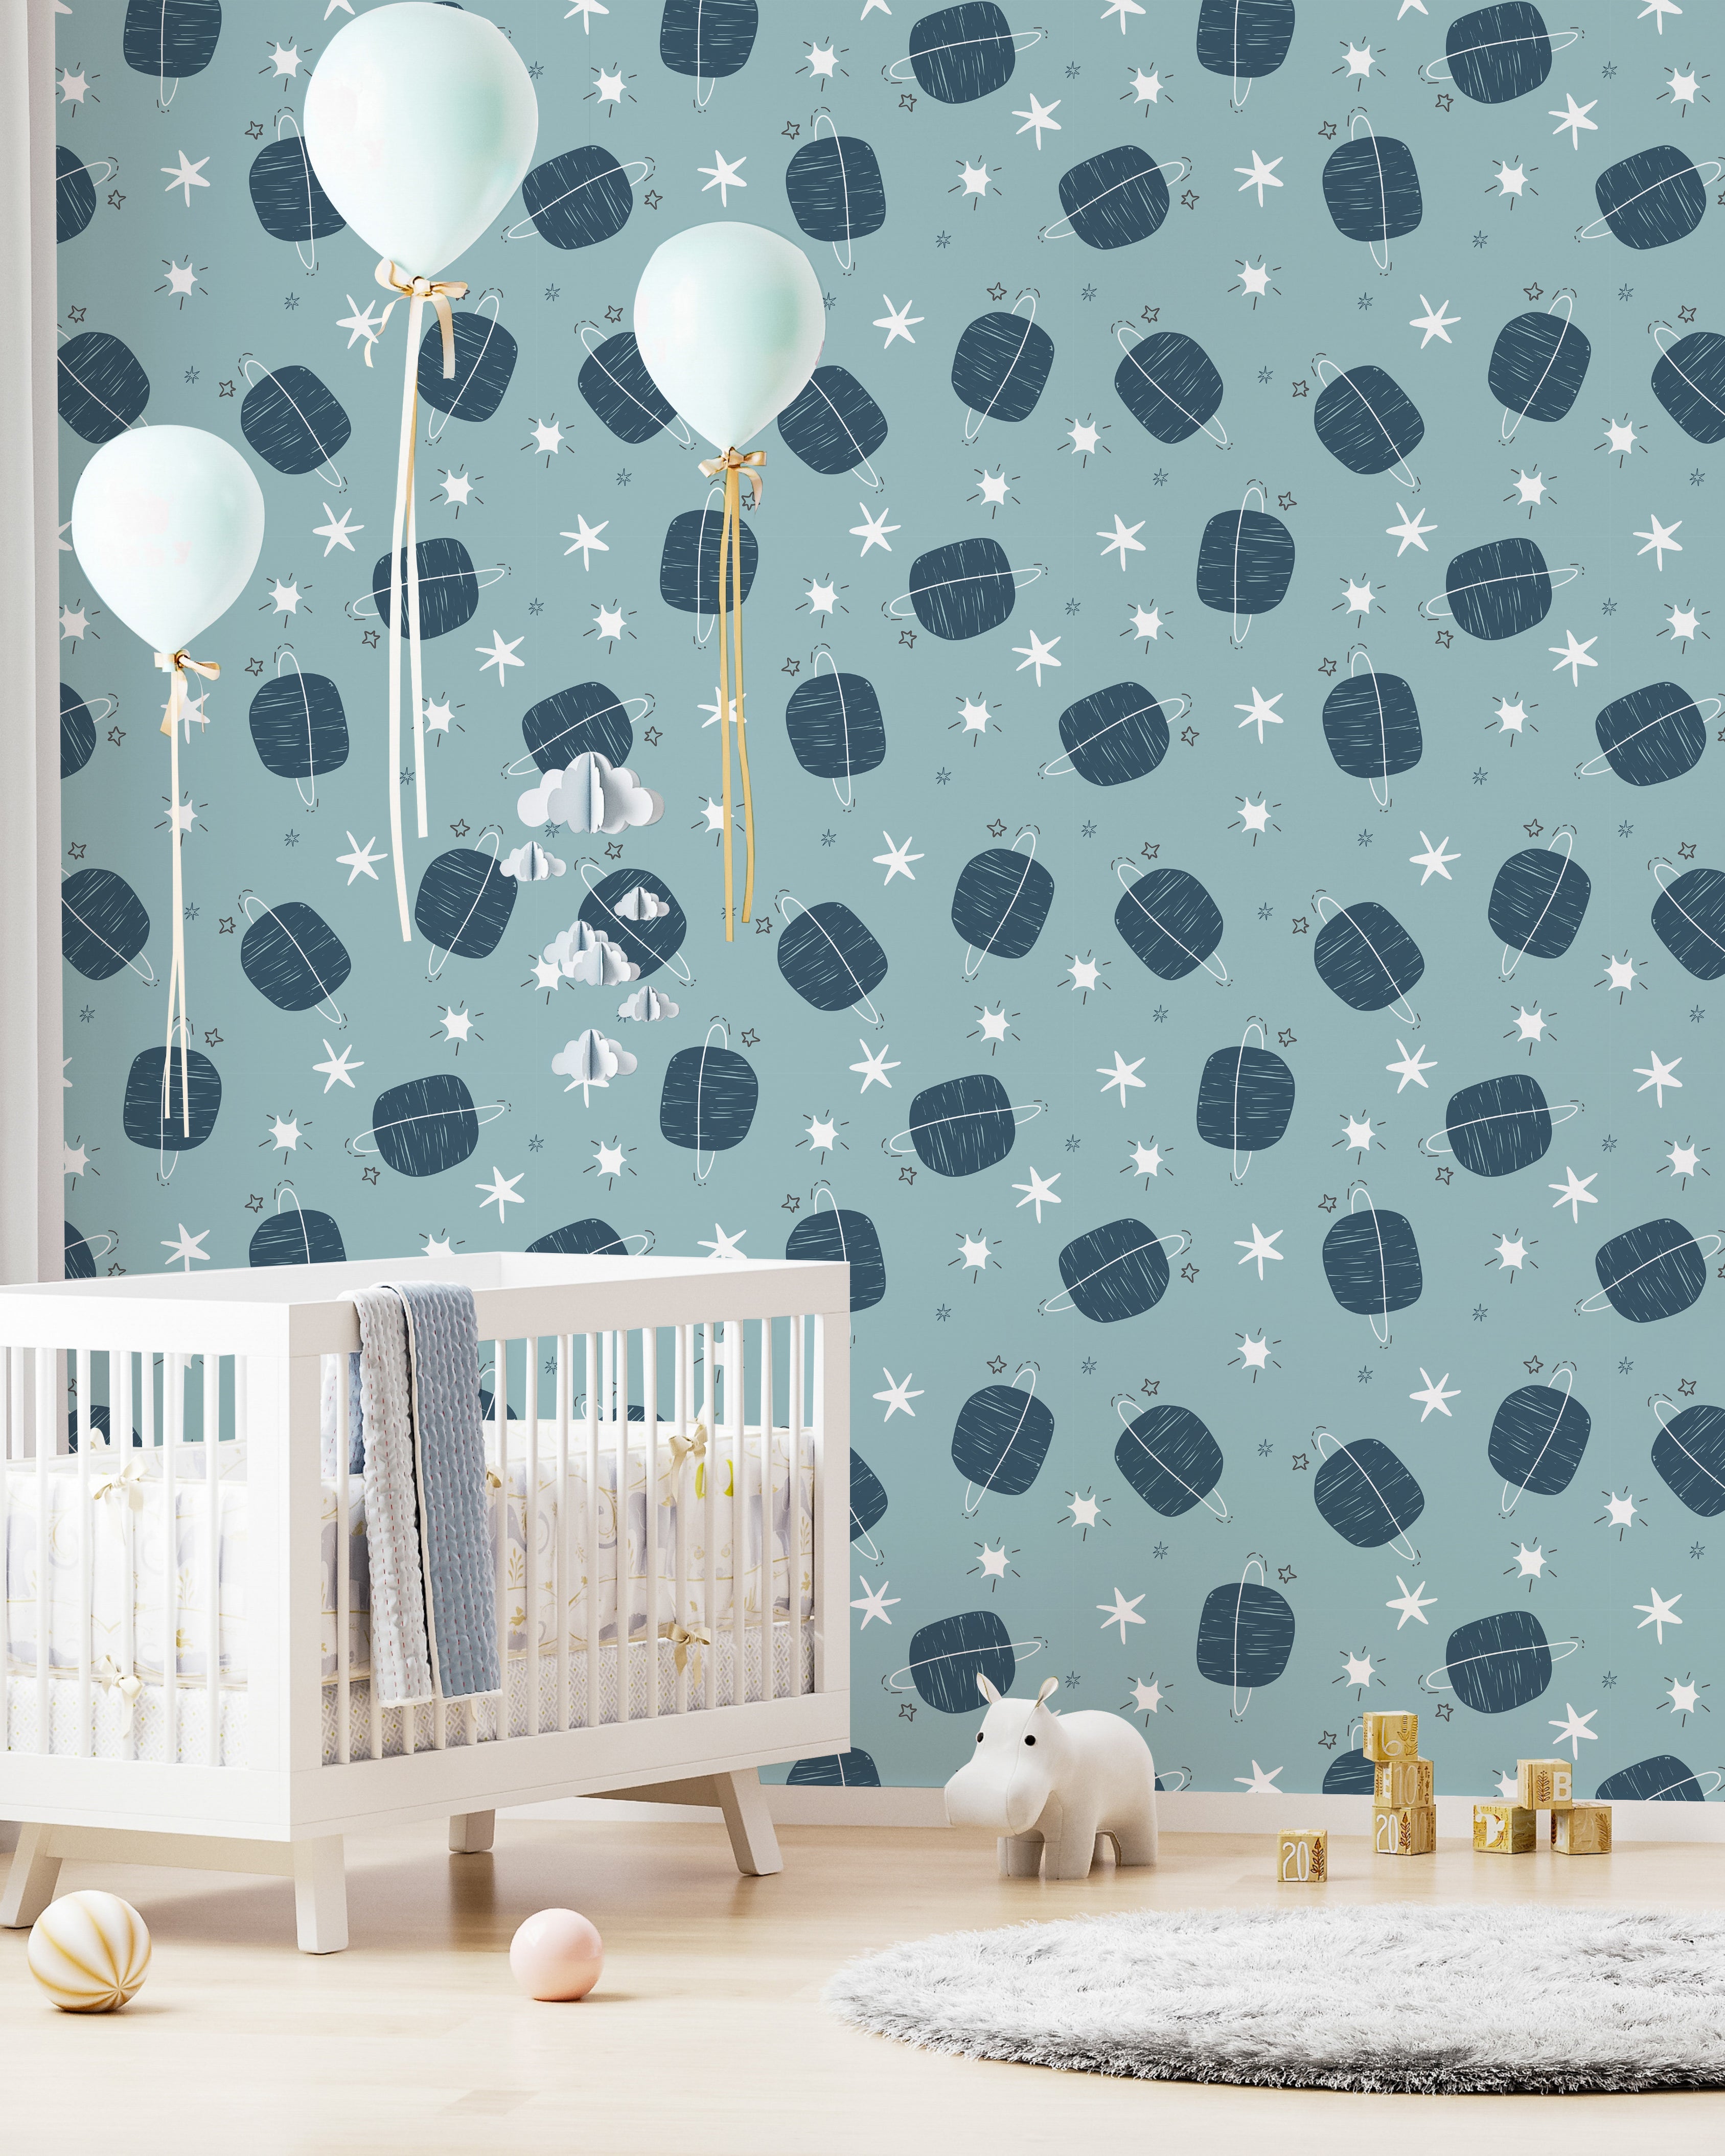 "Bright nursery featuring 'Starlit Planets' wallpaper, white furniture, light blue balloons, and a gentle, starry theme."